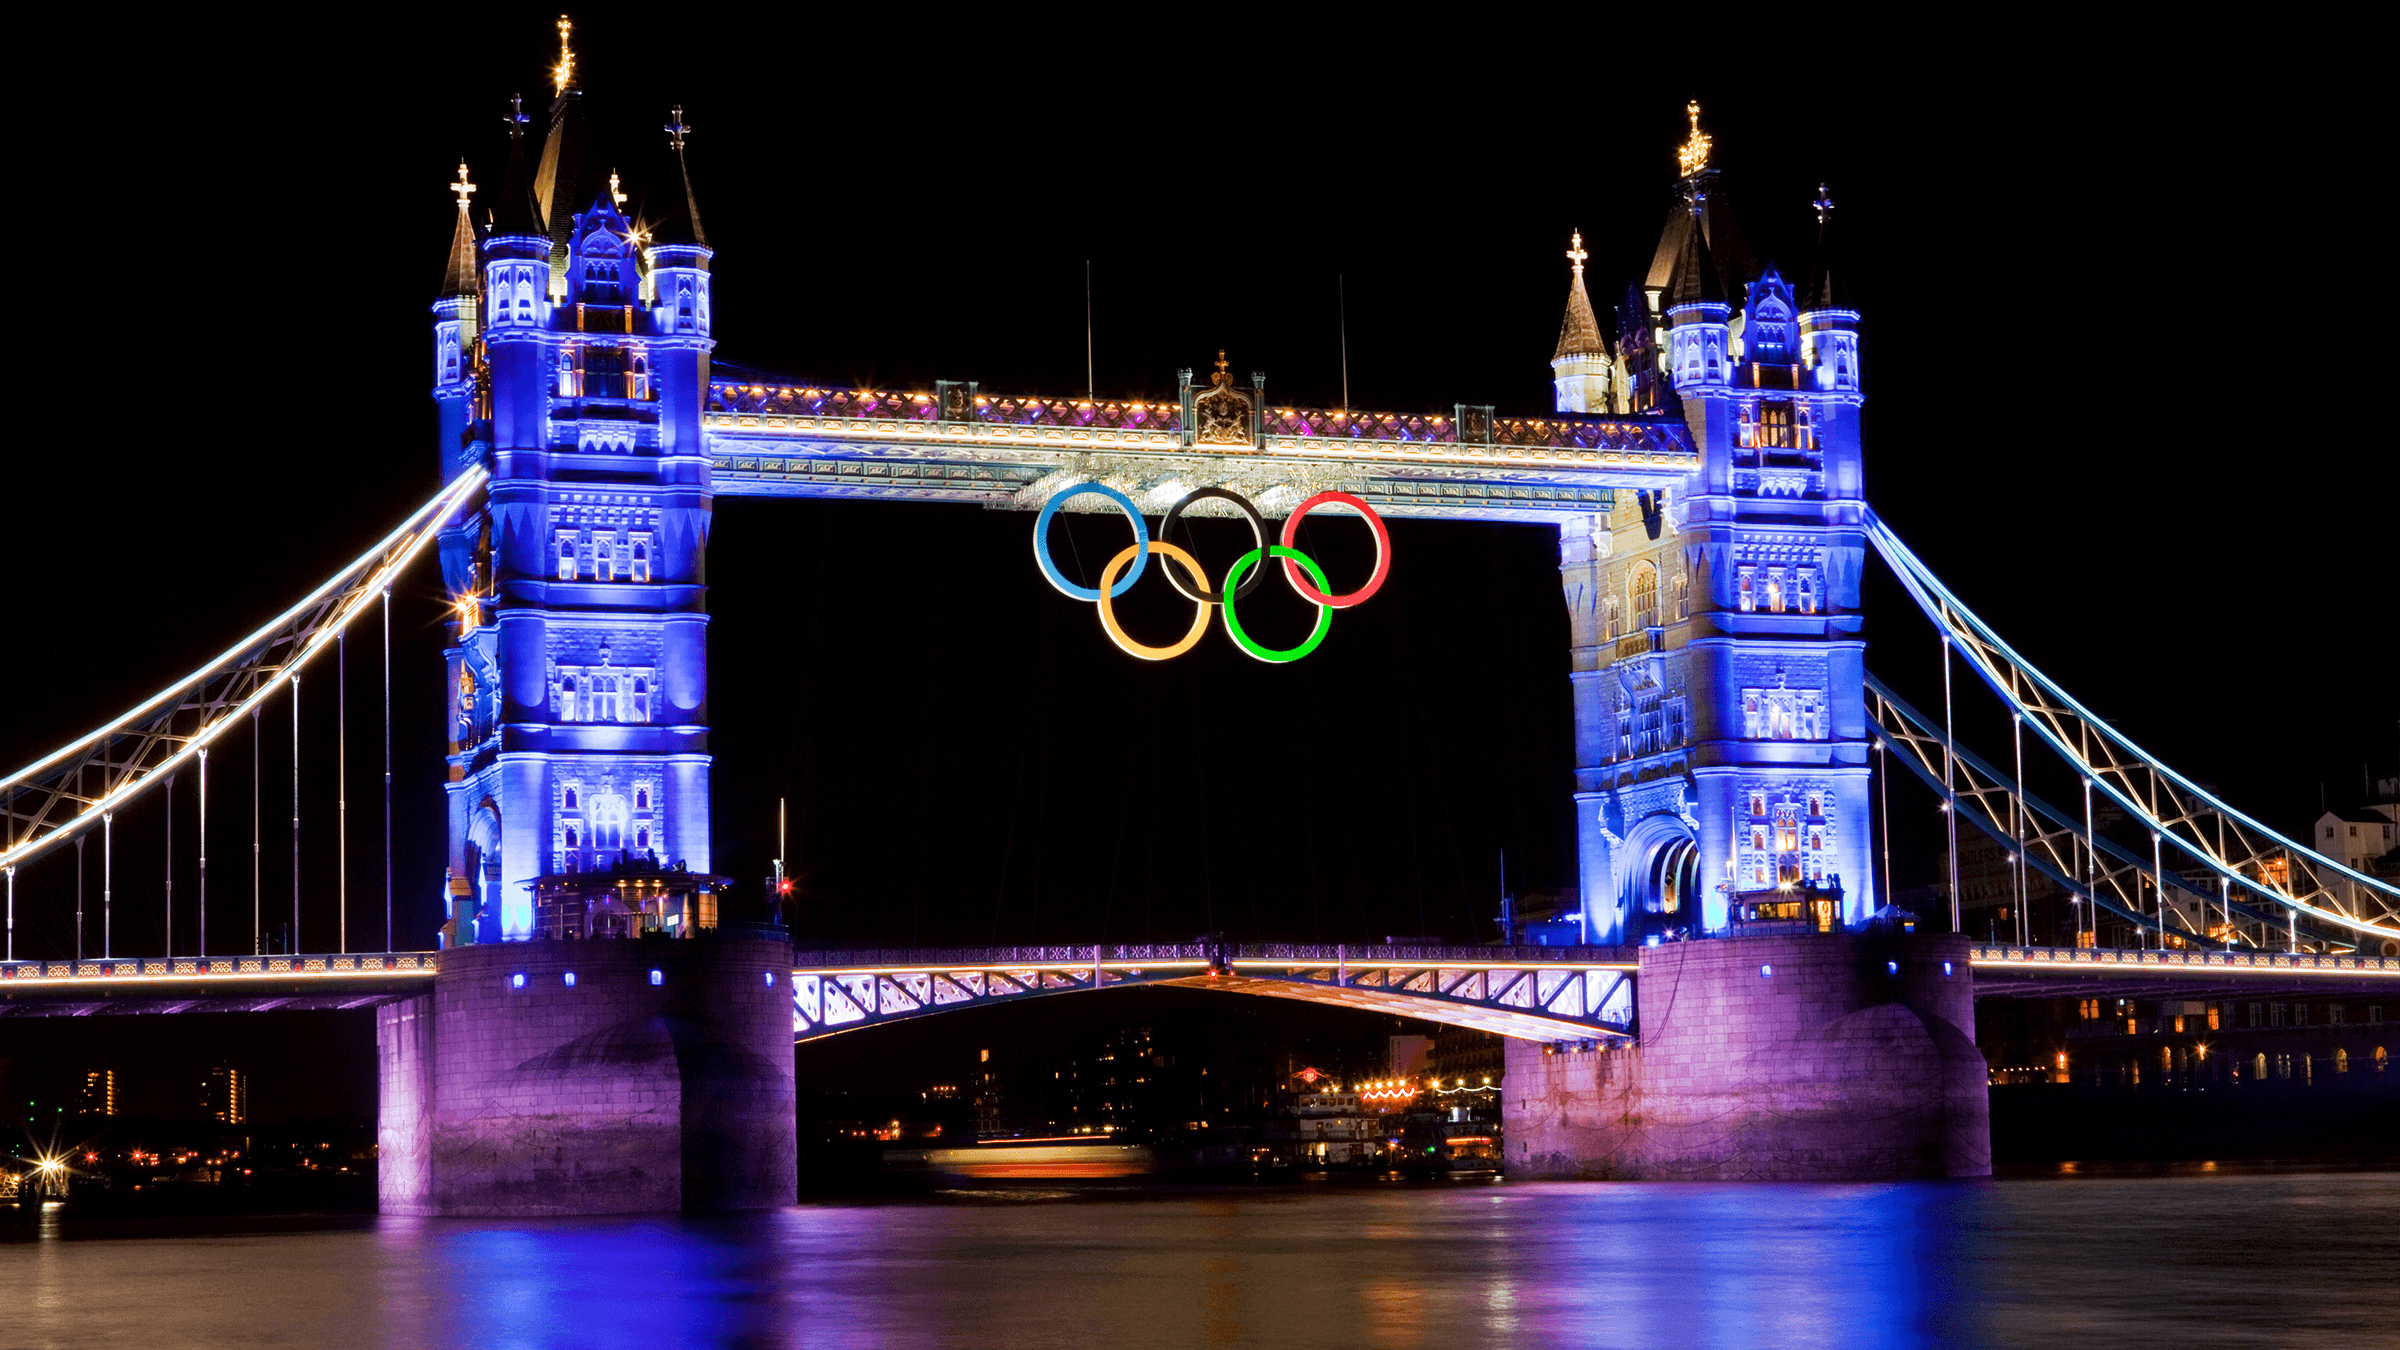 An image of Tower Bridge at night, adorned with the Olympic rings for the 2012 olympics